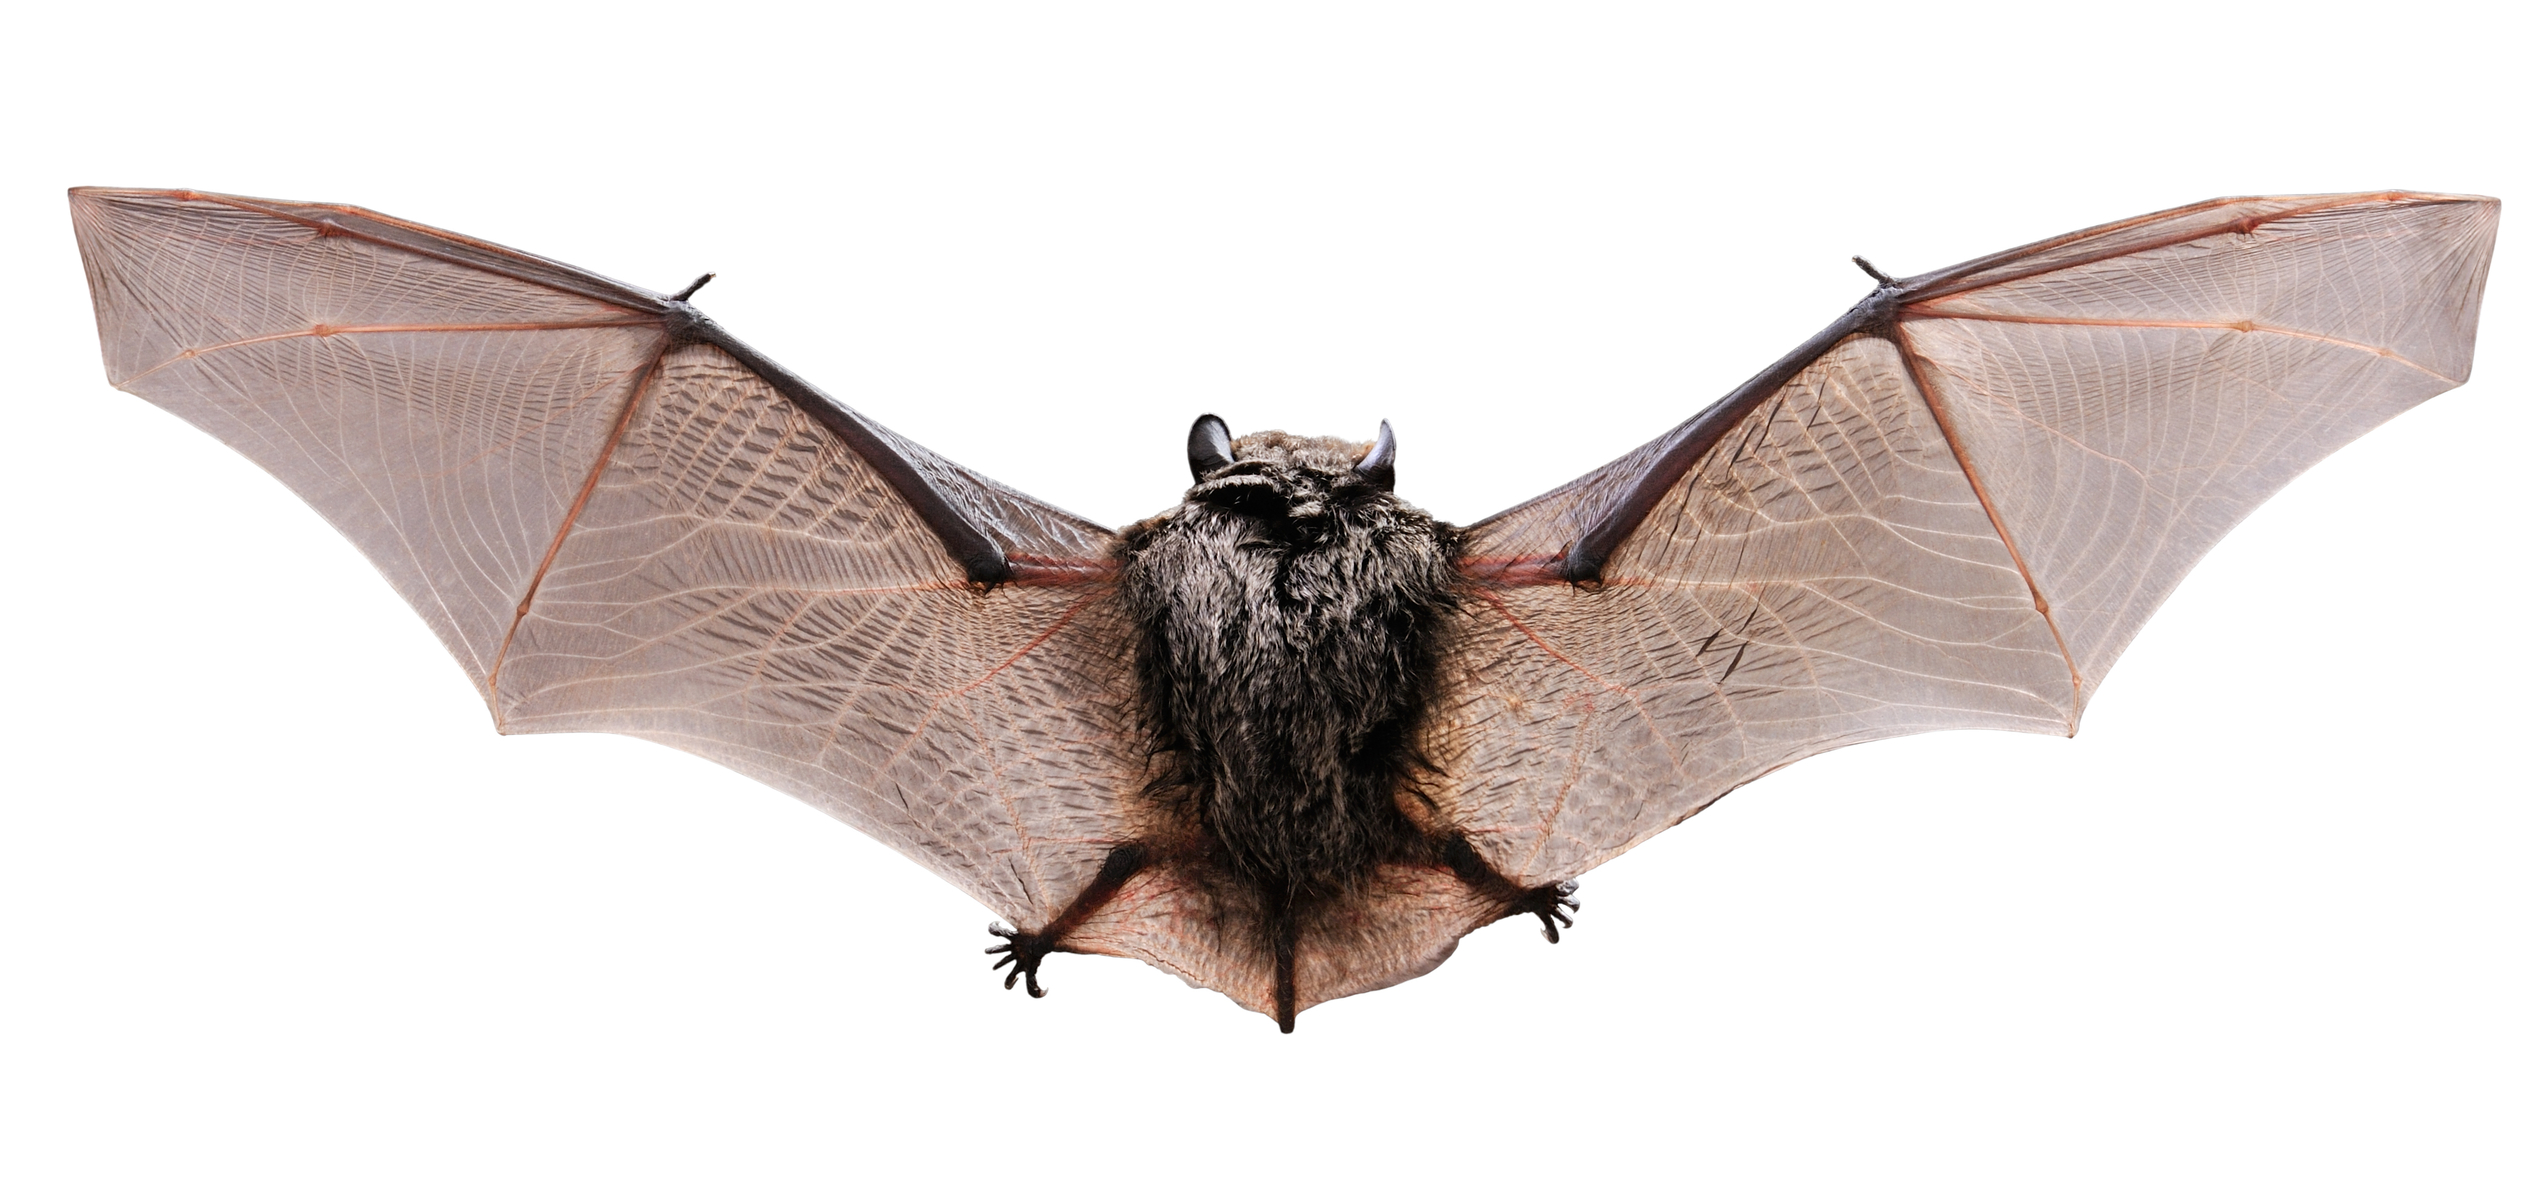 The little brown bat is native to much of North America.